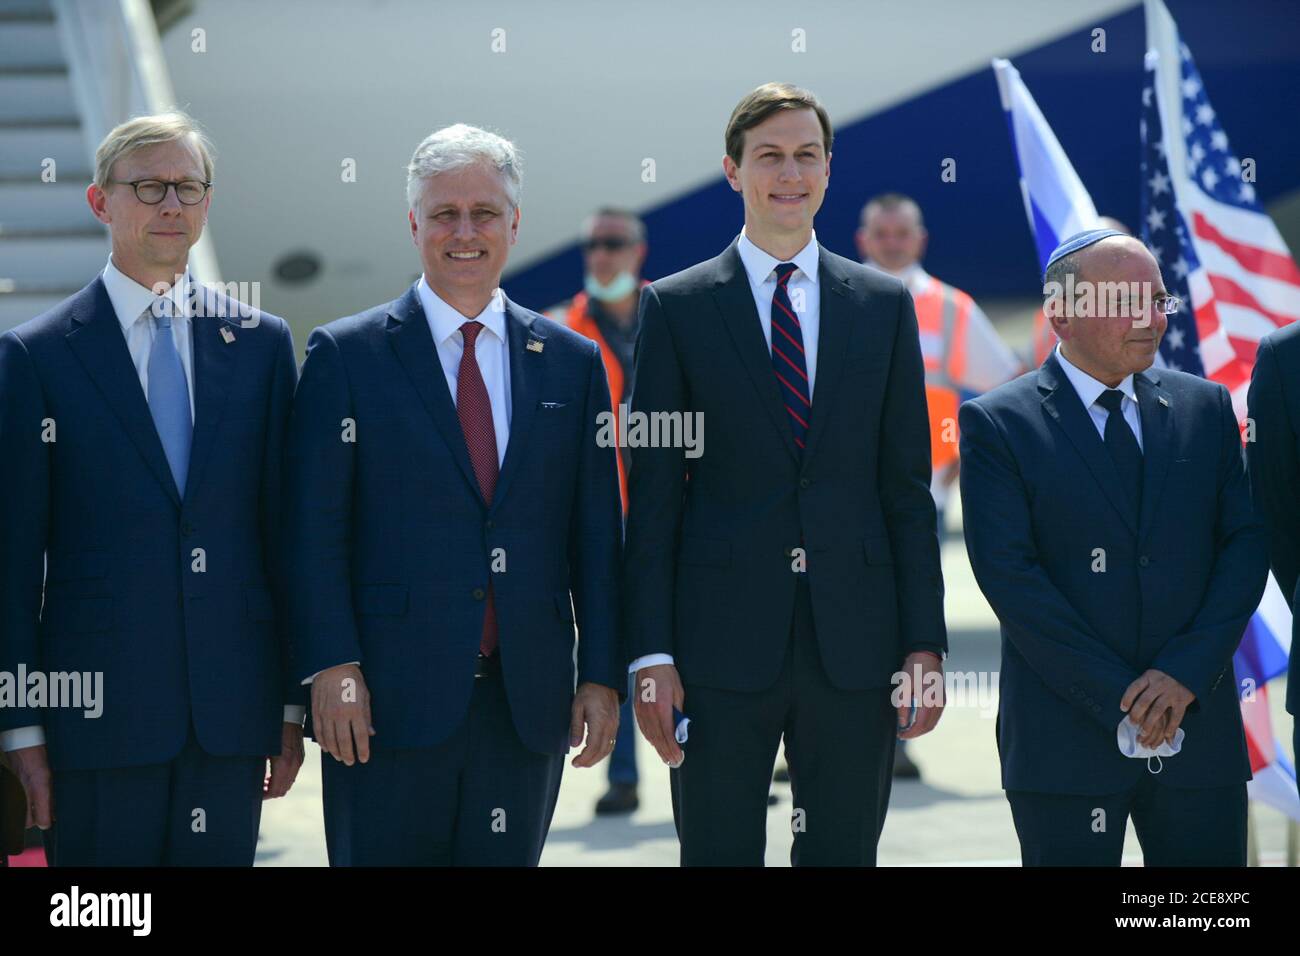 Lod, Israel . 31st August, 2020. Israel's chief of National Security Council Meir Ben Shabbat (1st R), U.S. National Security Advisor Robert O'Brien (2nd L) and Senior U.S. Presidential Advisor Jared Kushner (2nd R) pose for a group photo before their departure to United Arab Emirates (UAE) at Ben Gurion International Airport near central Israeli city of Tel Aviv on Aug. 31, 2020. An Israeli delegation, joined by senior U.S. officials, departed from Tel Aviv on Monday to Abu Dhabi in Israel's first commercial flight to the United Arab Emirates. Credit: Xinhua/Alamy Live News Stock Photo